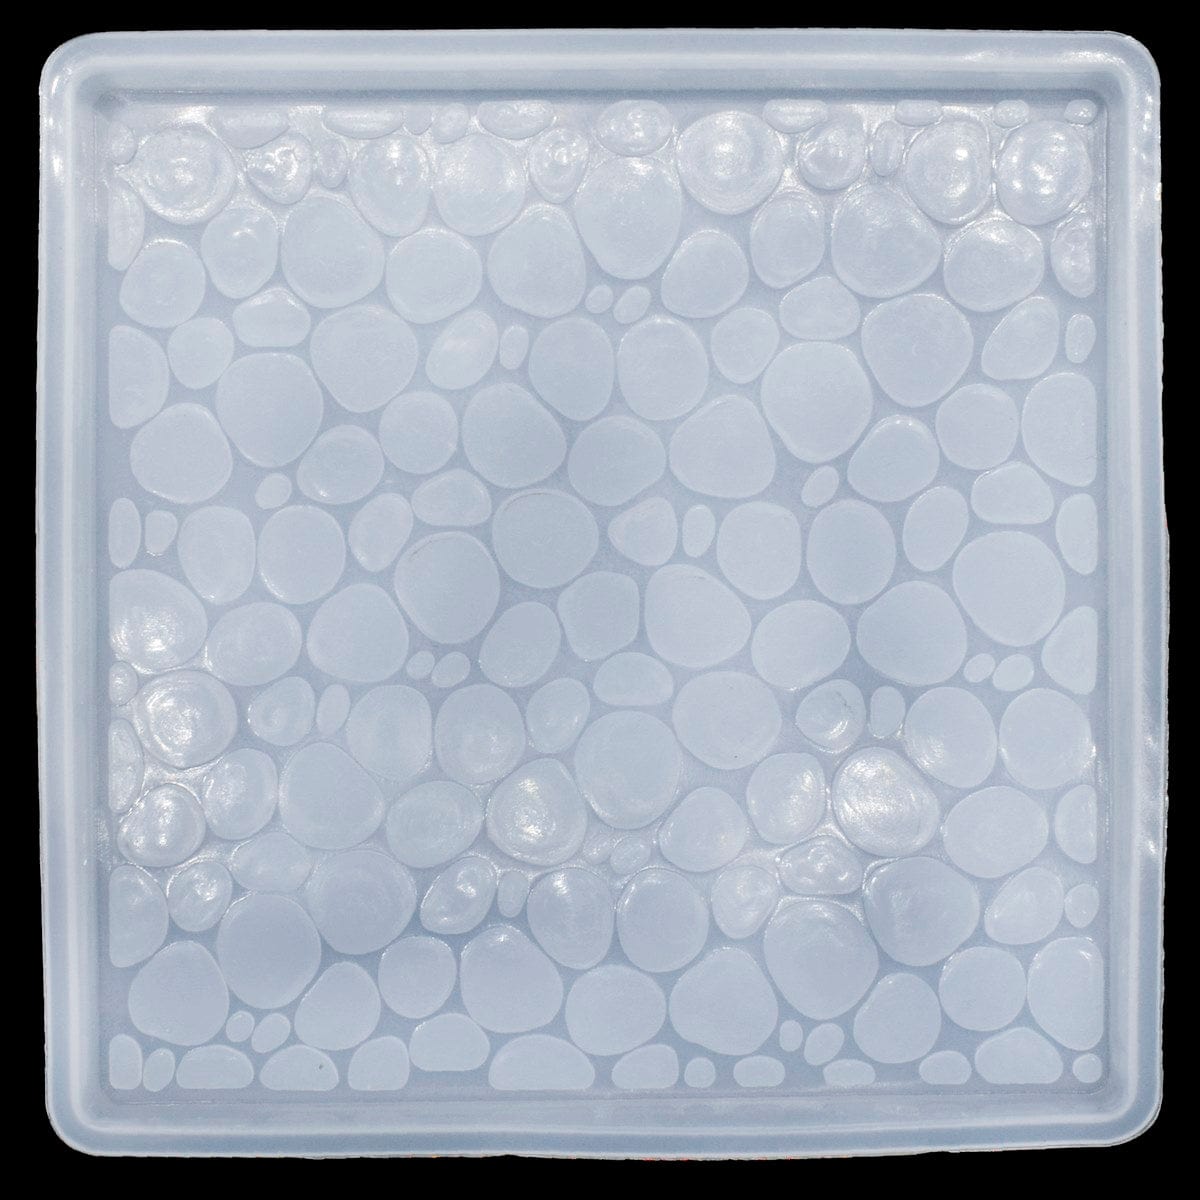 jags-mumbai Mould Silicone Mould Square Honey Comb 4X4 SMSH00